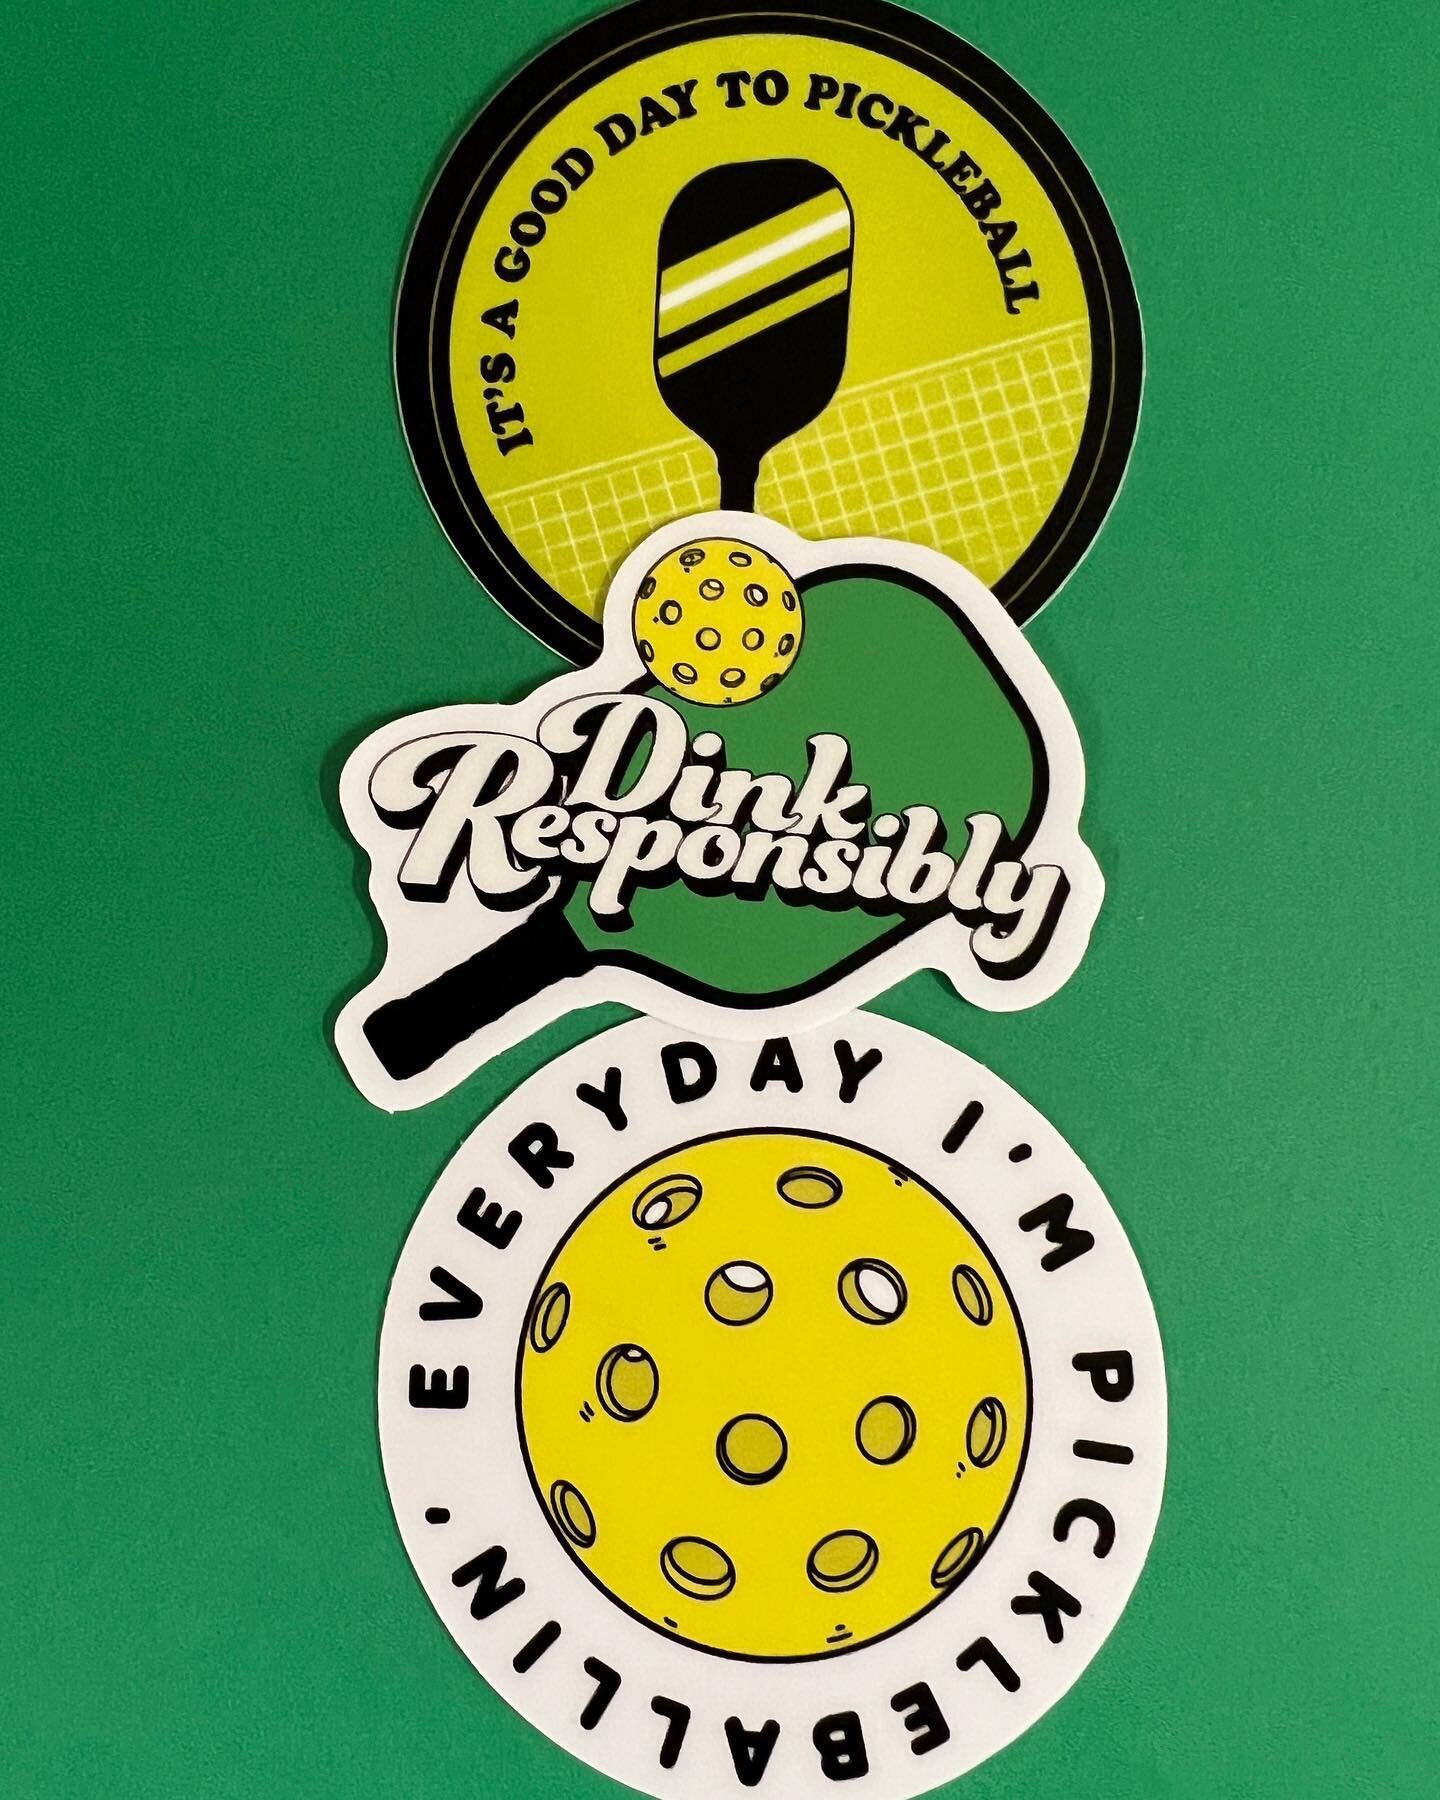 Pickleball anyone? New vinyls(here) and papers for crafting arriving soon. #pickleball #paperandimarshall